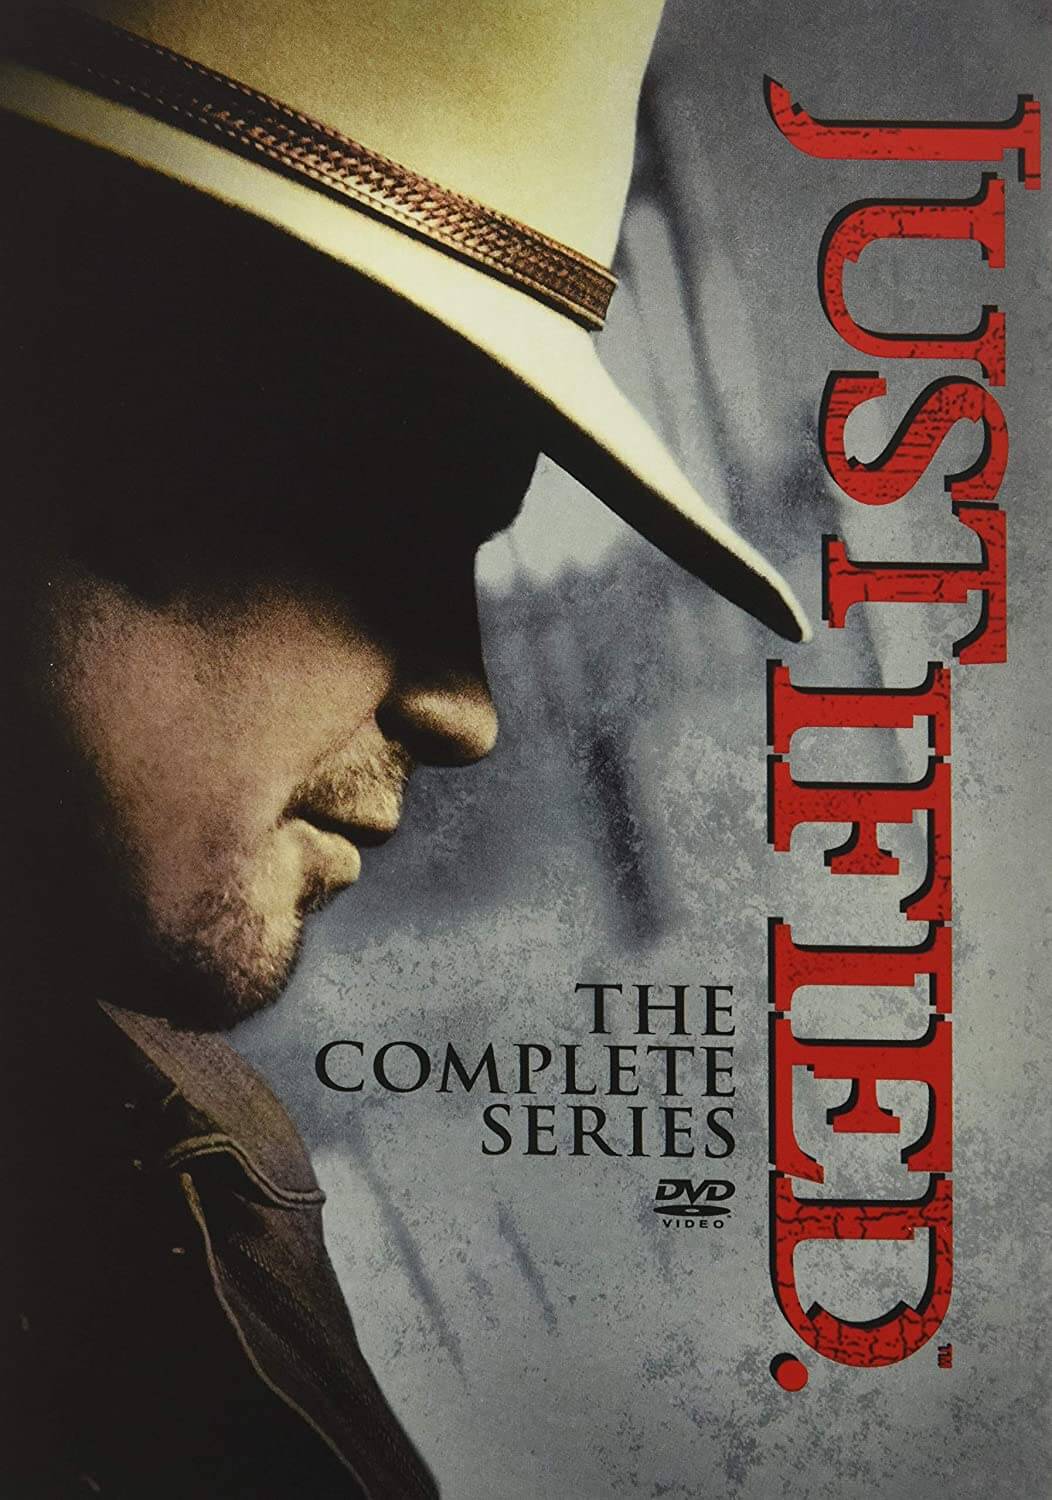 Justified The Complete Series Season 1-6 Box Set